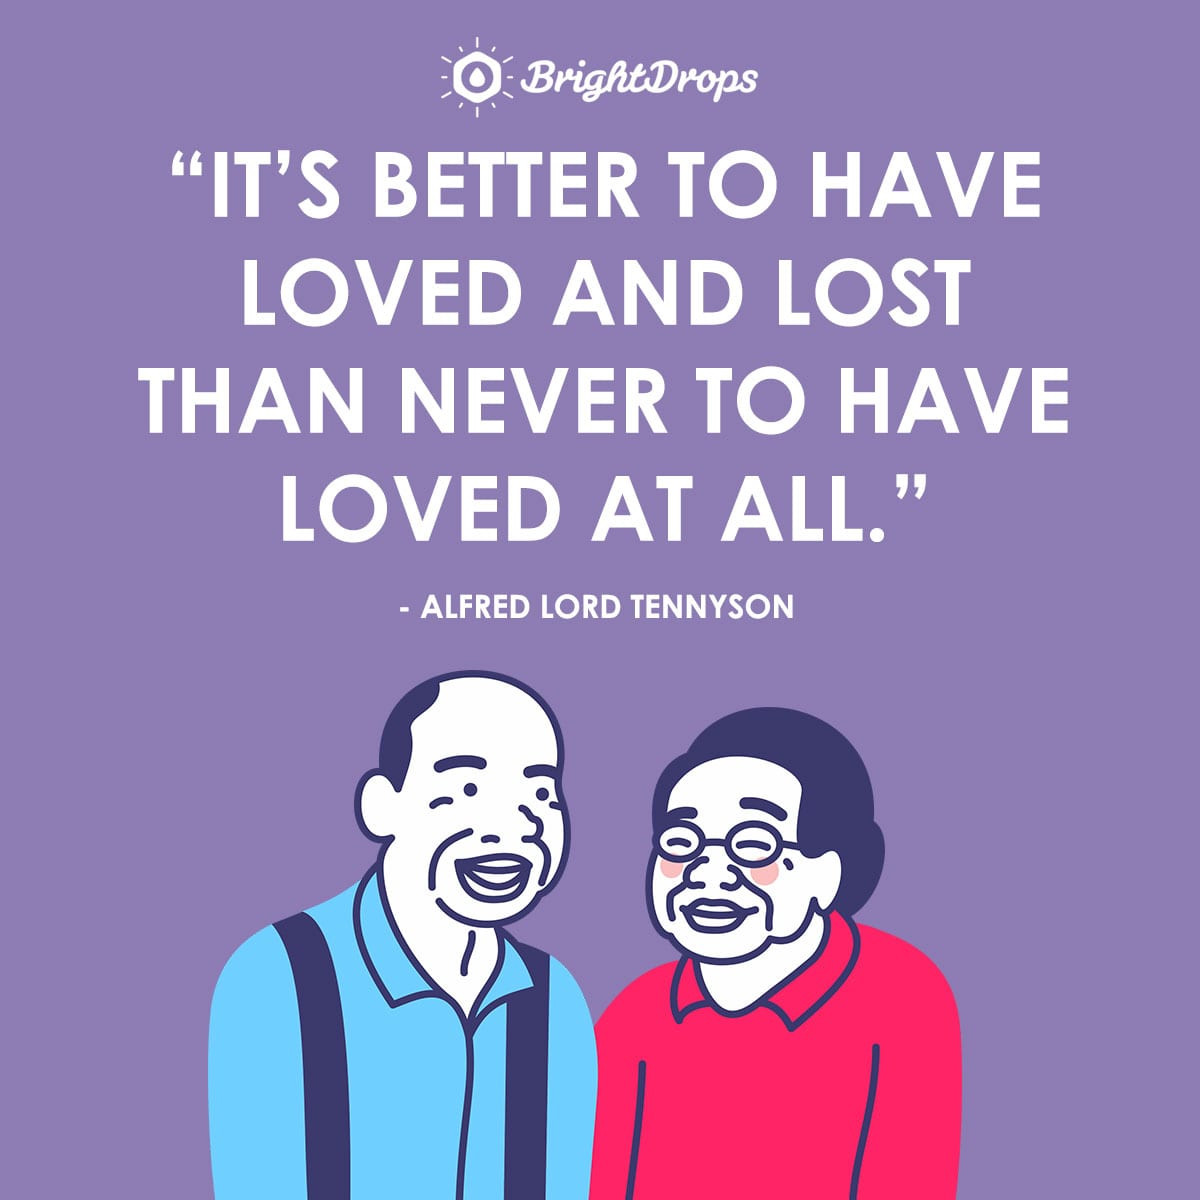 Quotes About Love Lost
 21 Healing Quotes on Lost Love and Fixing a Broken Heart